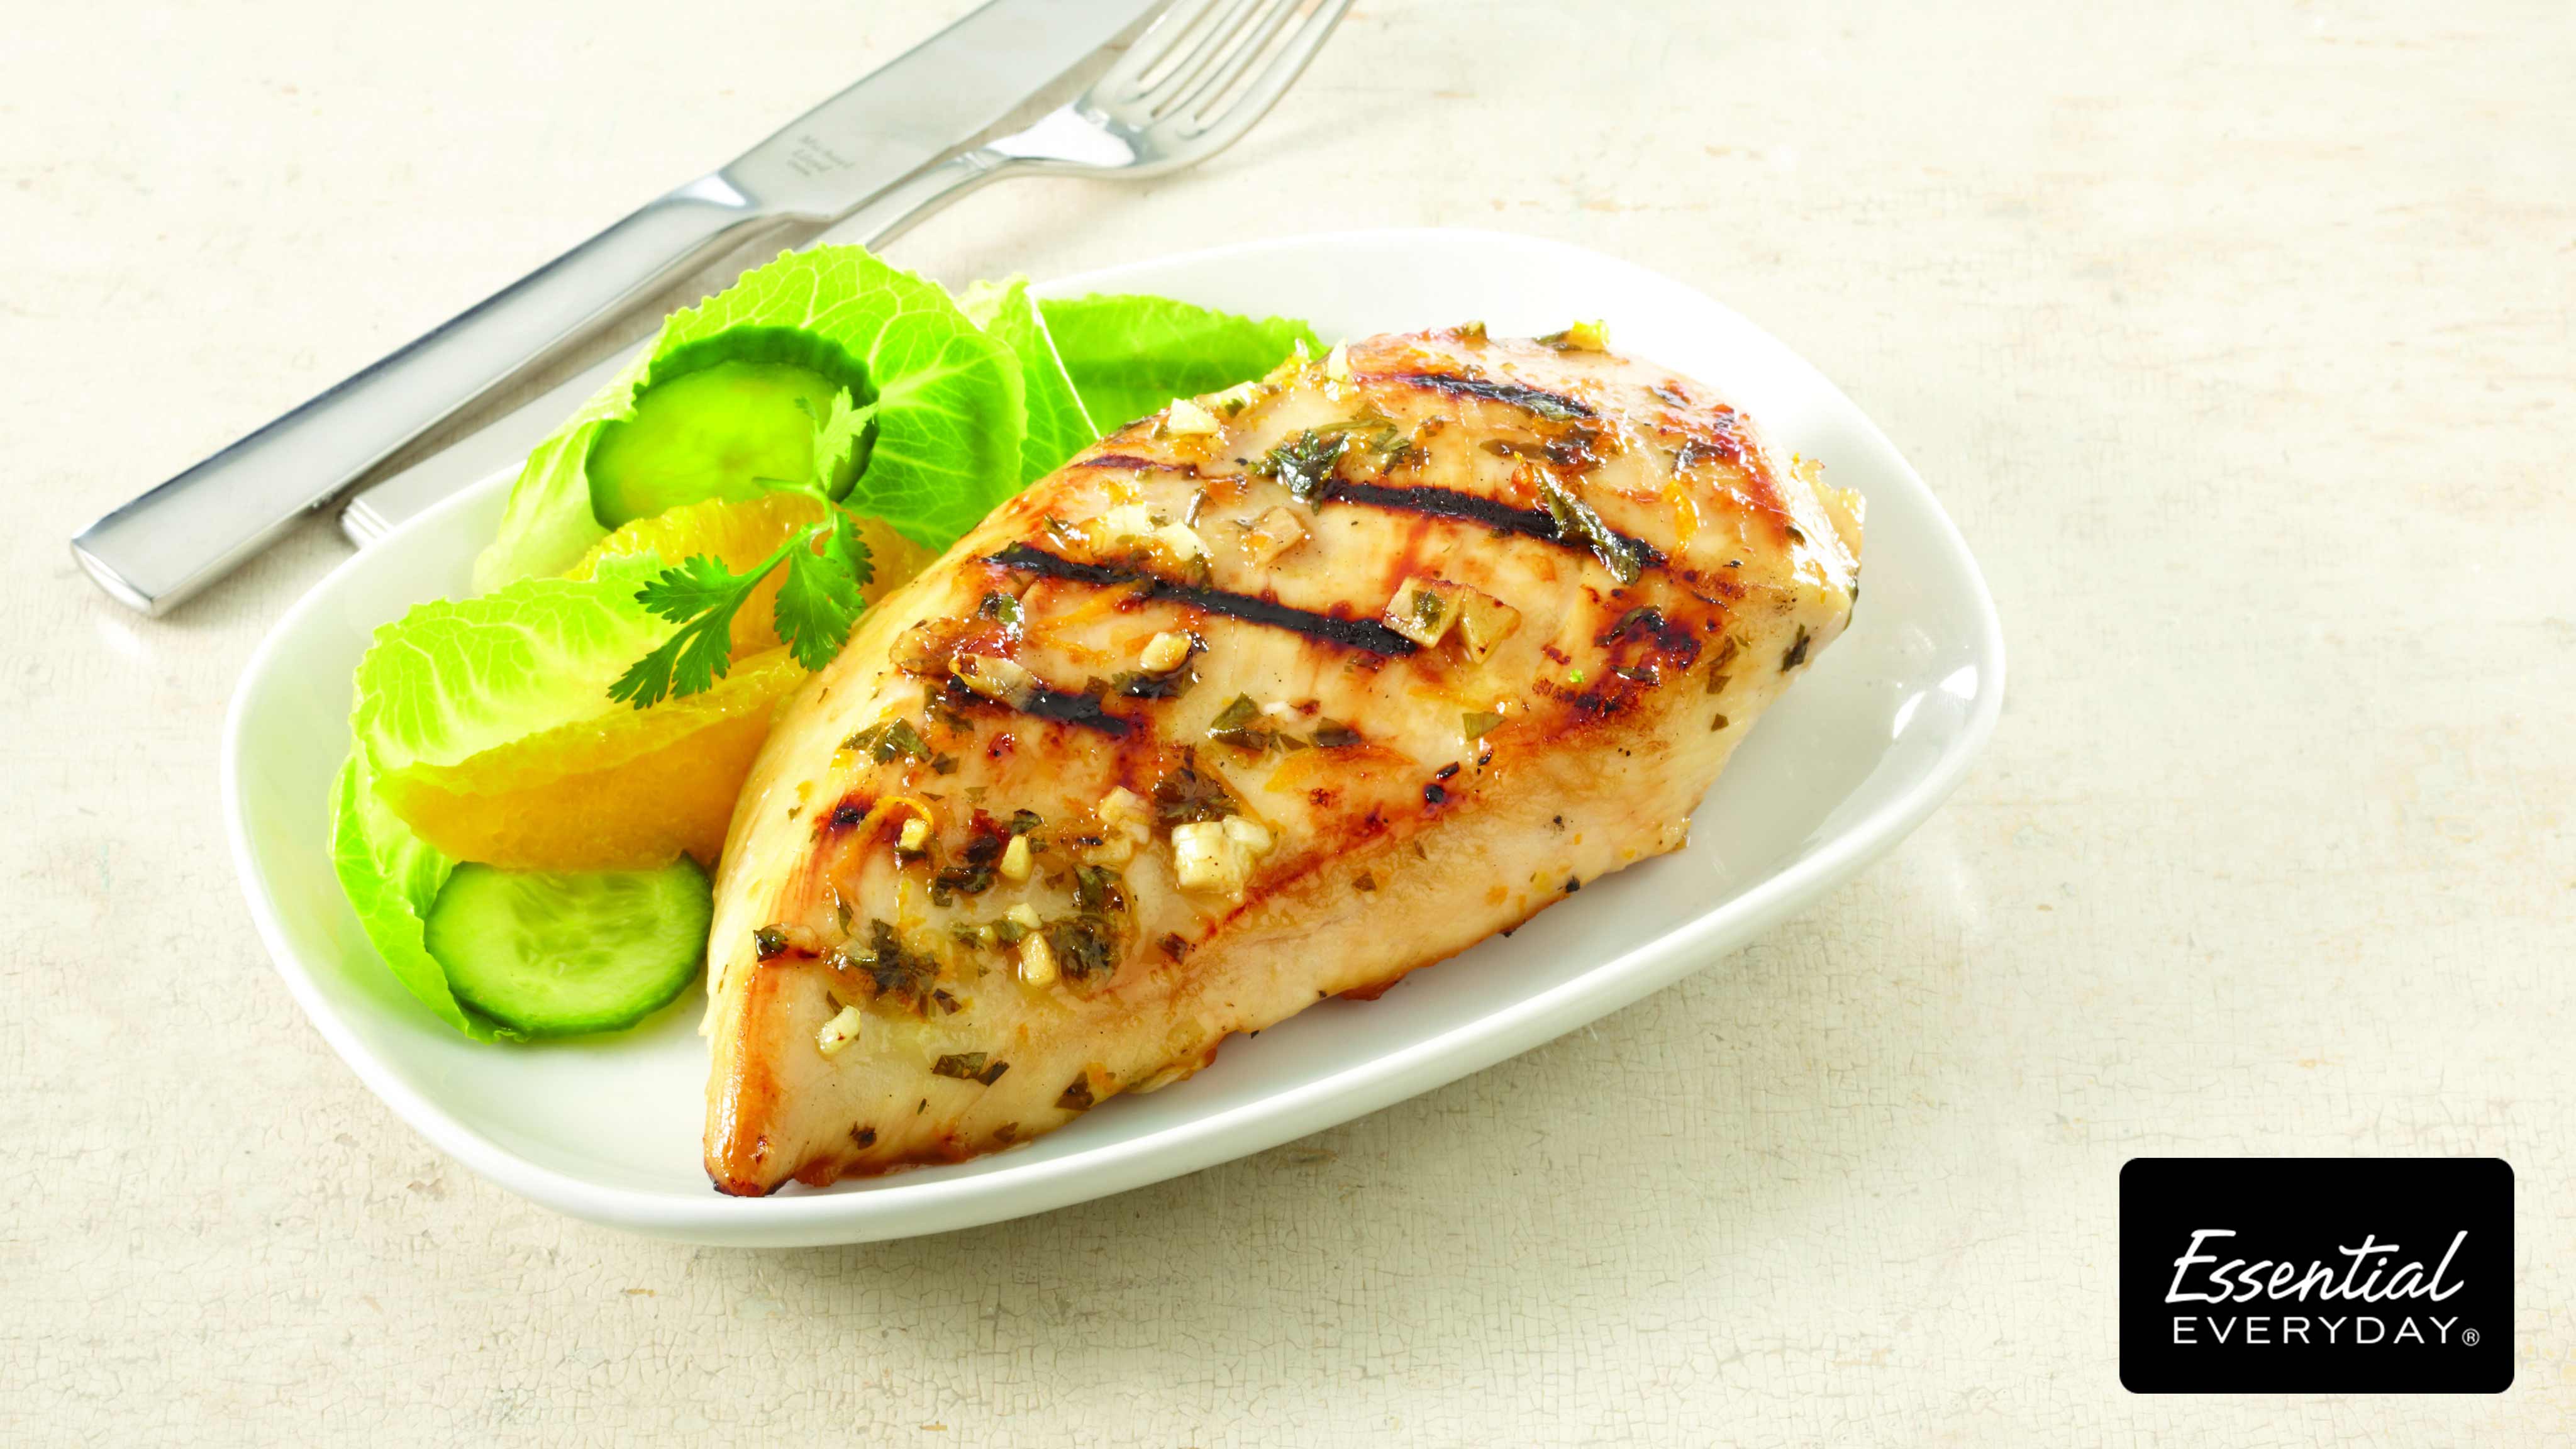 Image for Recipe Grilled Margarita Chicken